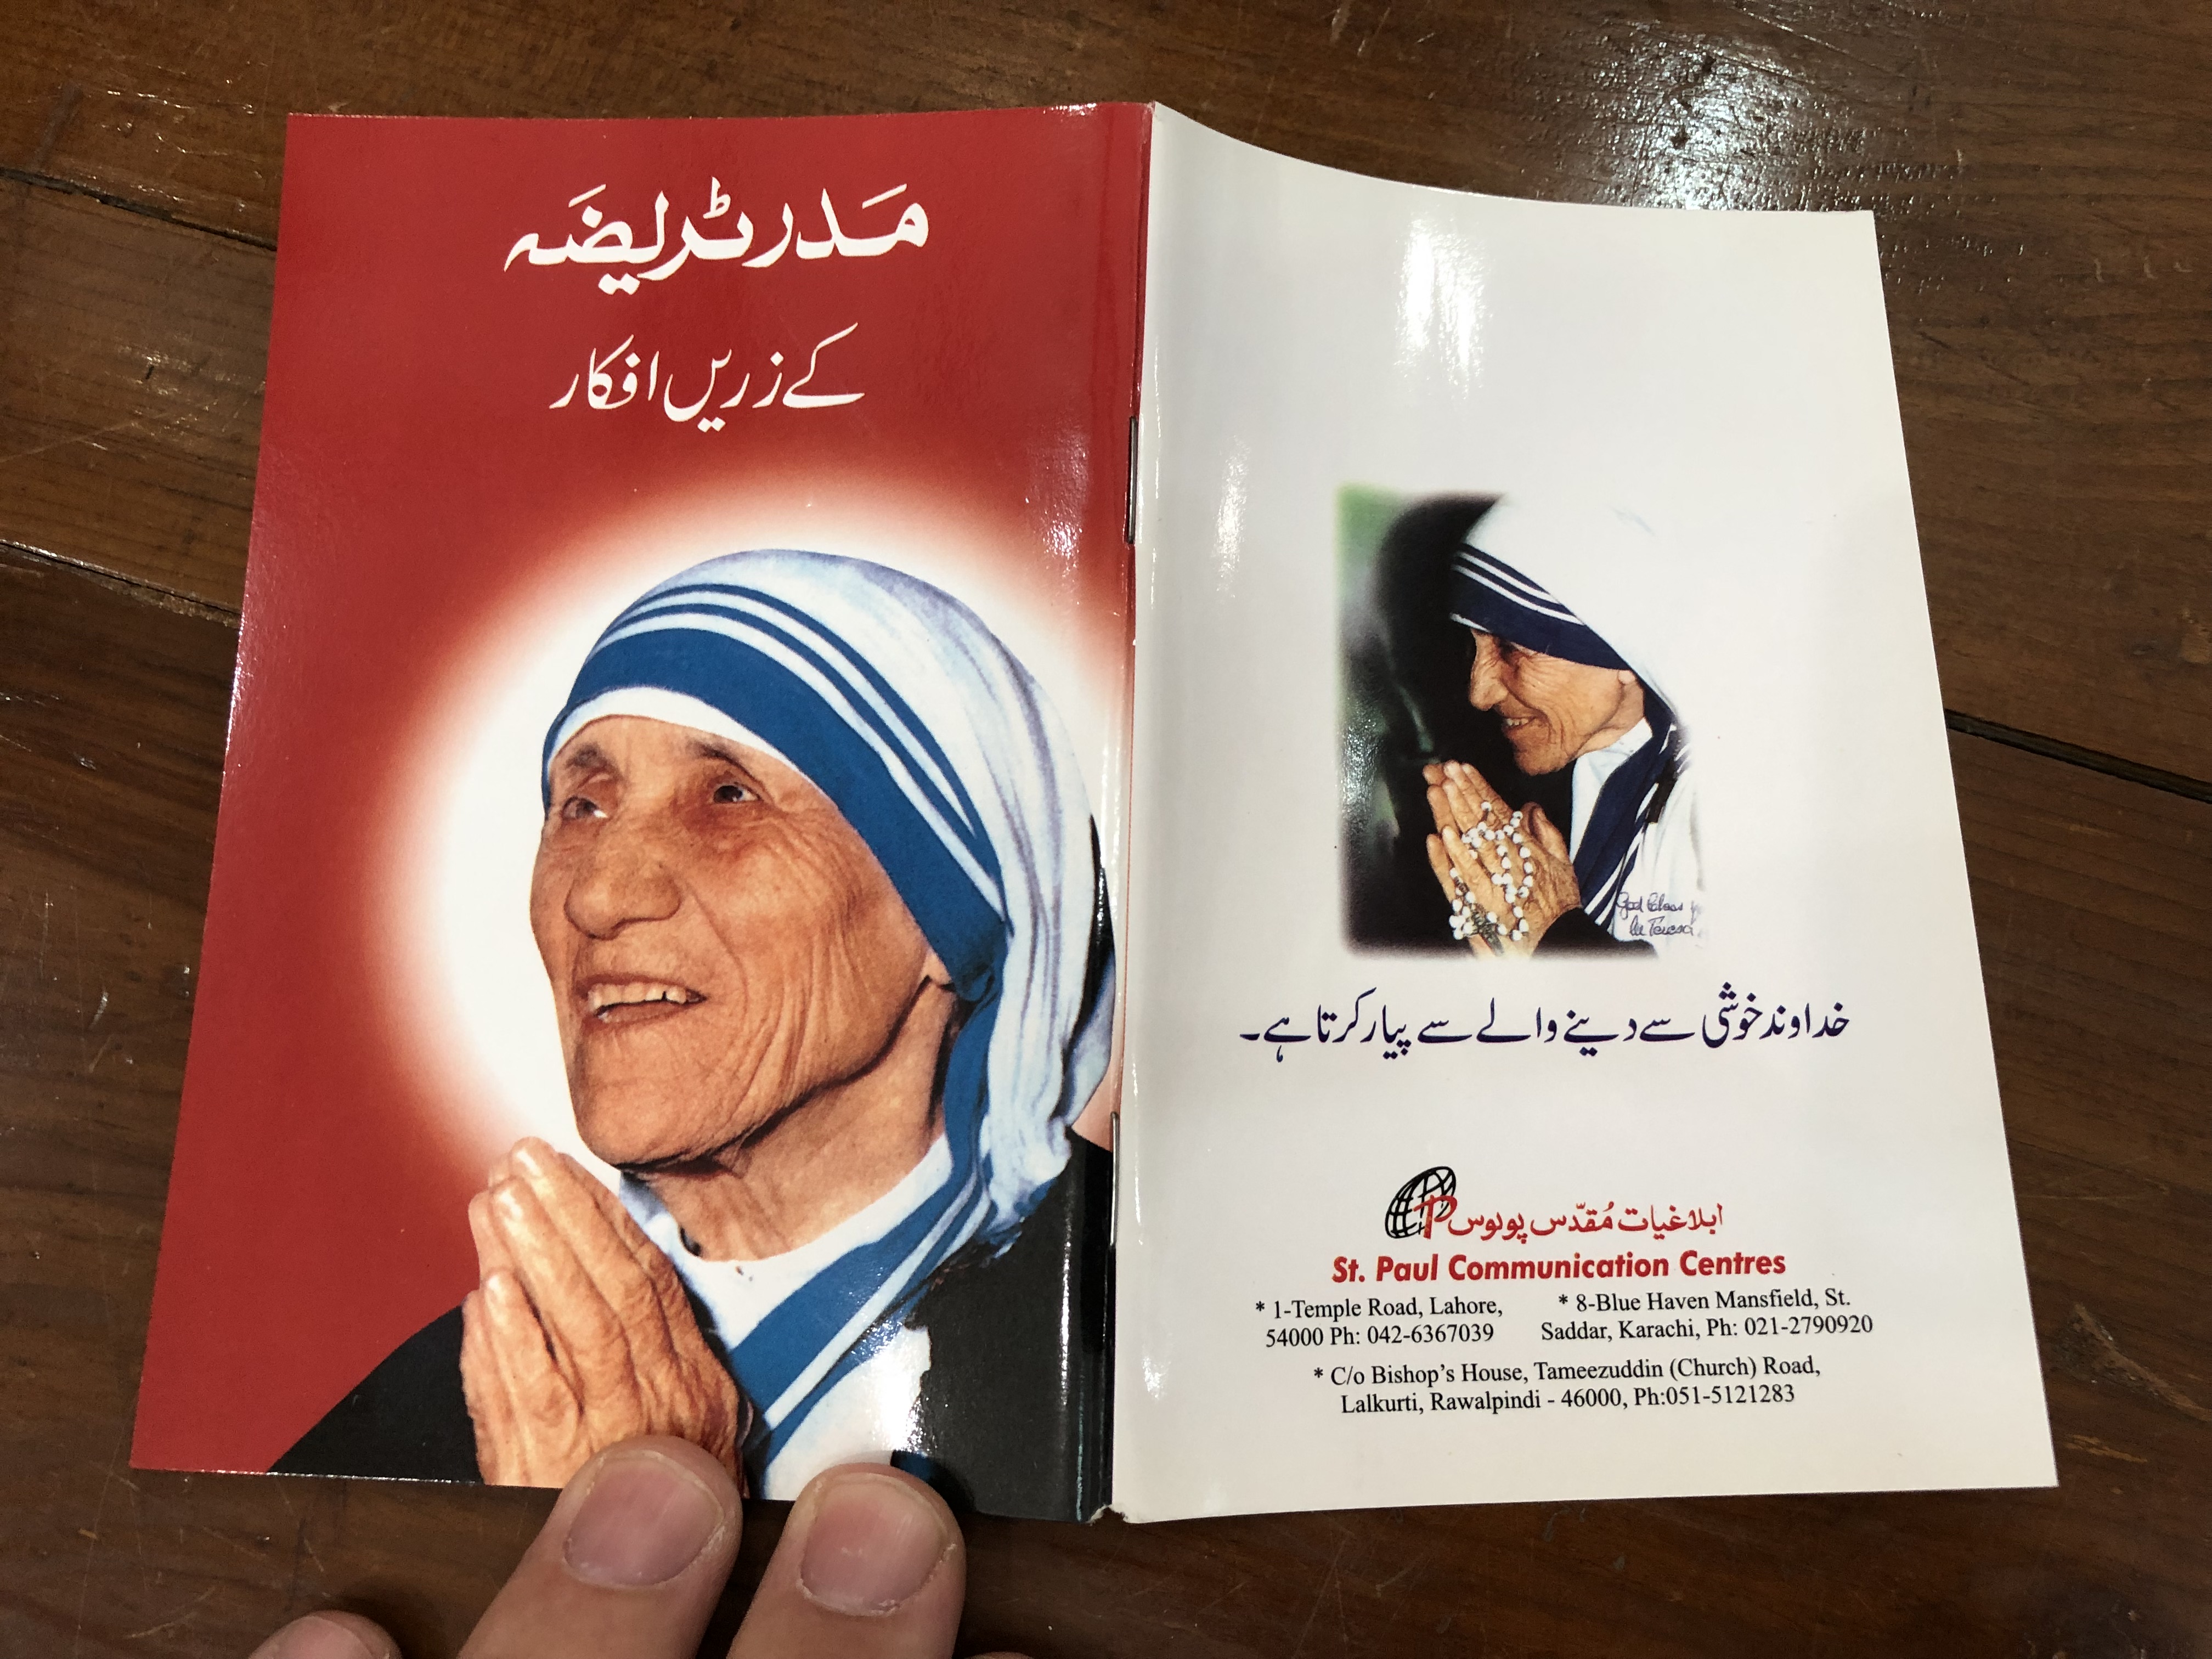 urdu-language-booklet-about-mother-theresa-with-quotes-paperback-2007-st.-paul-communication-centres-11-.jpg